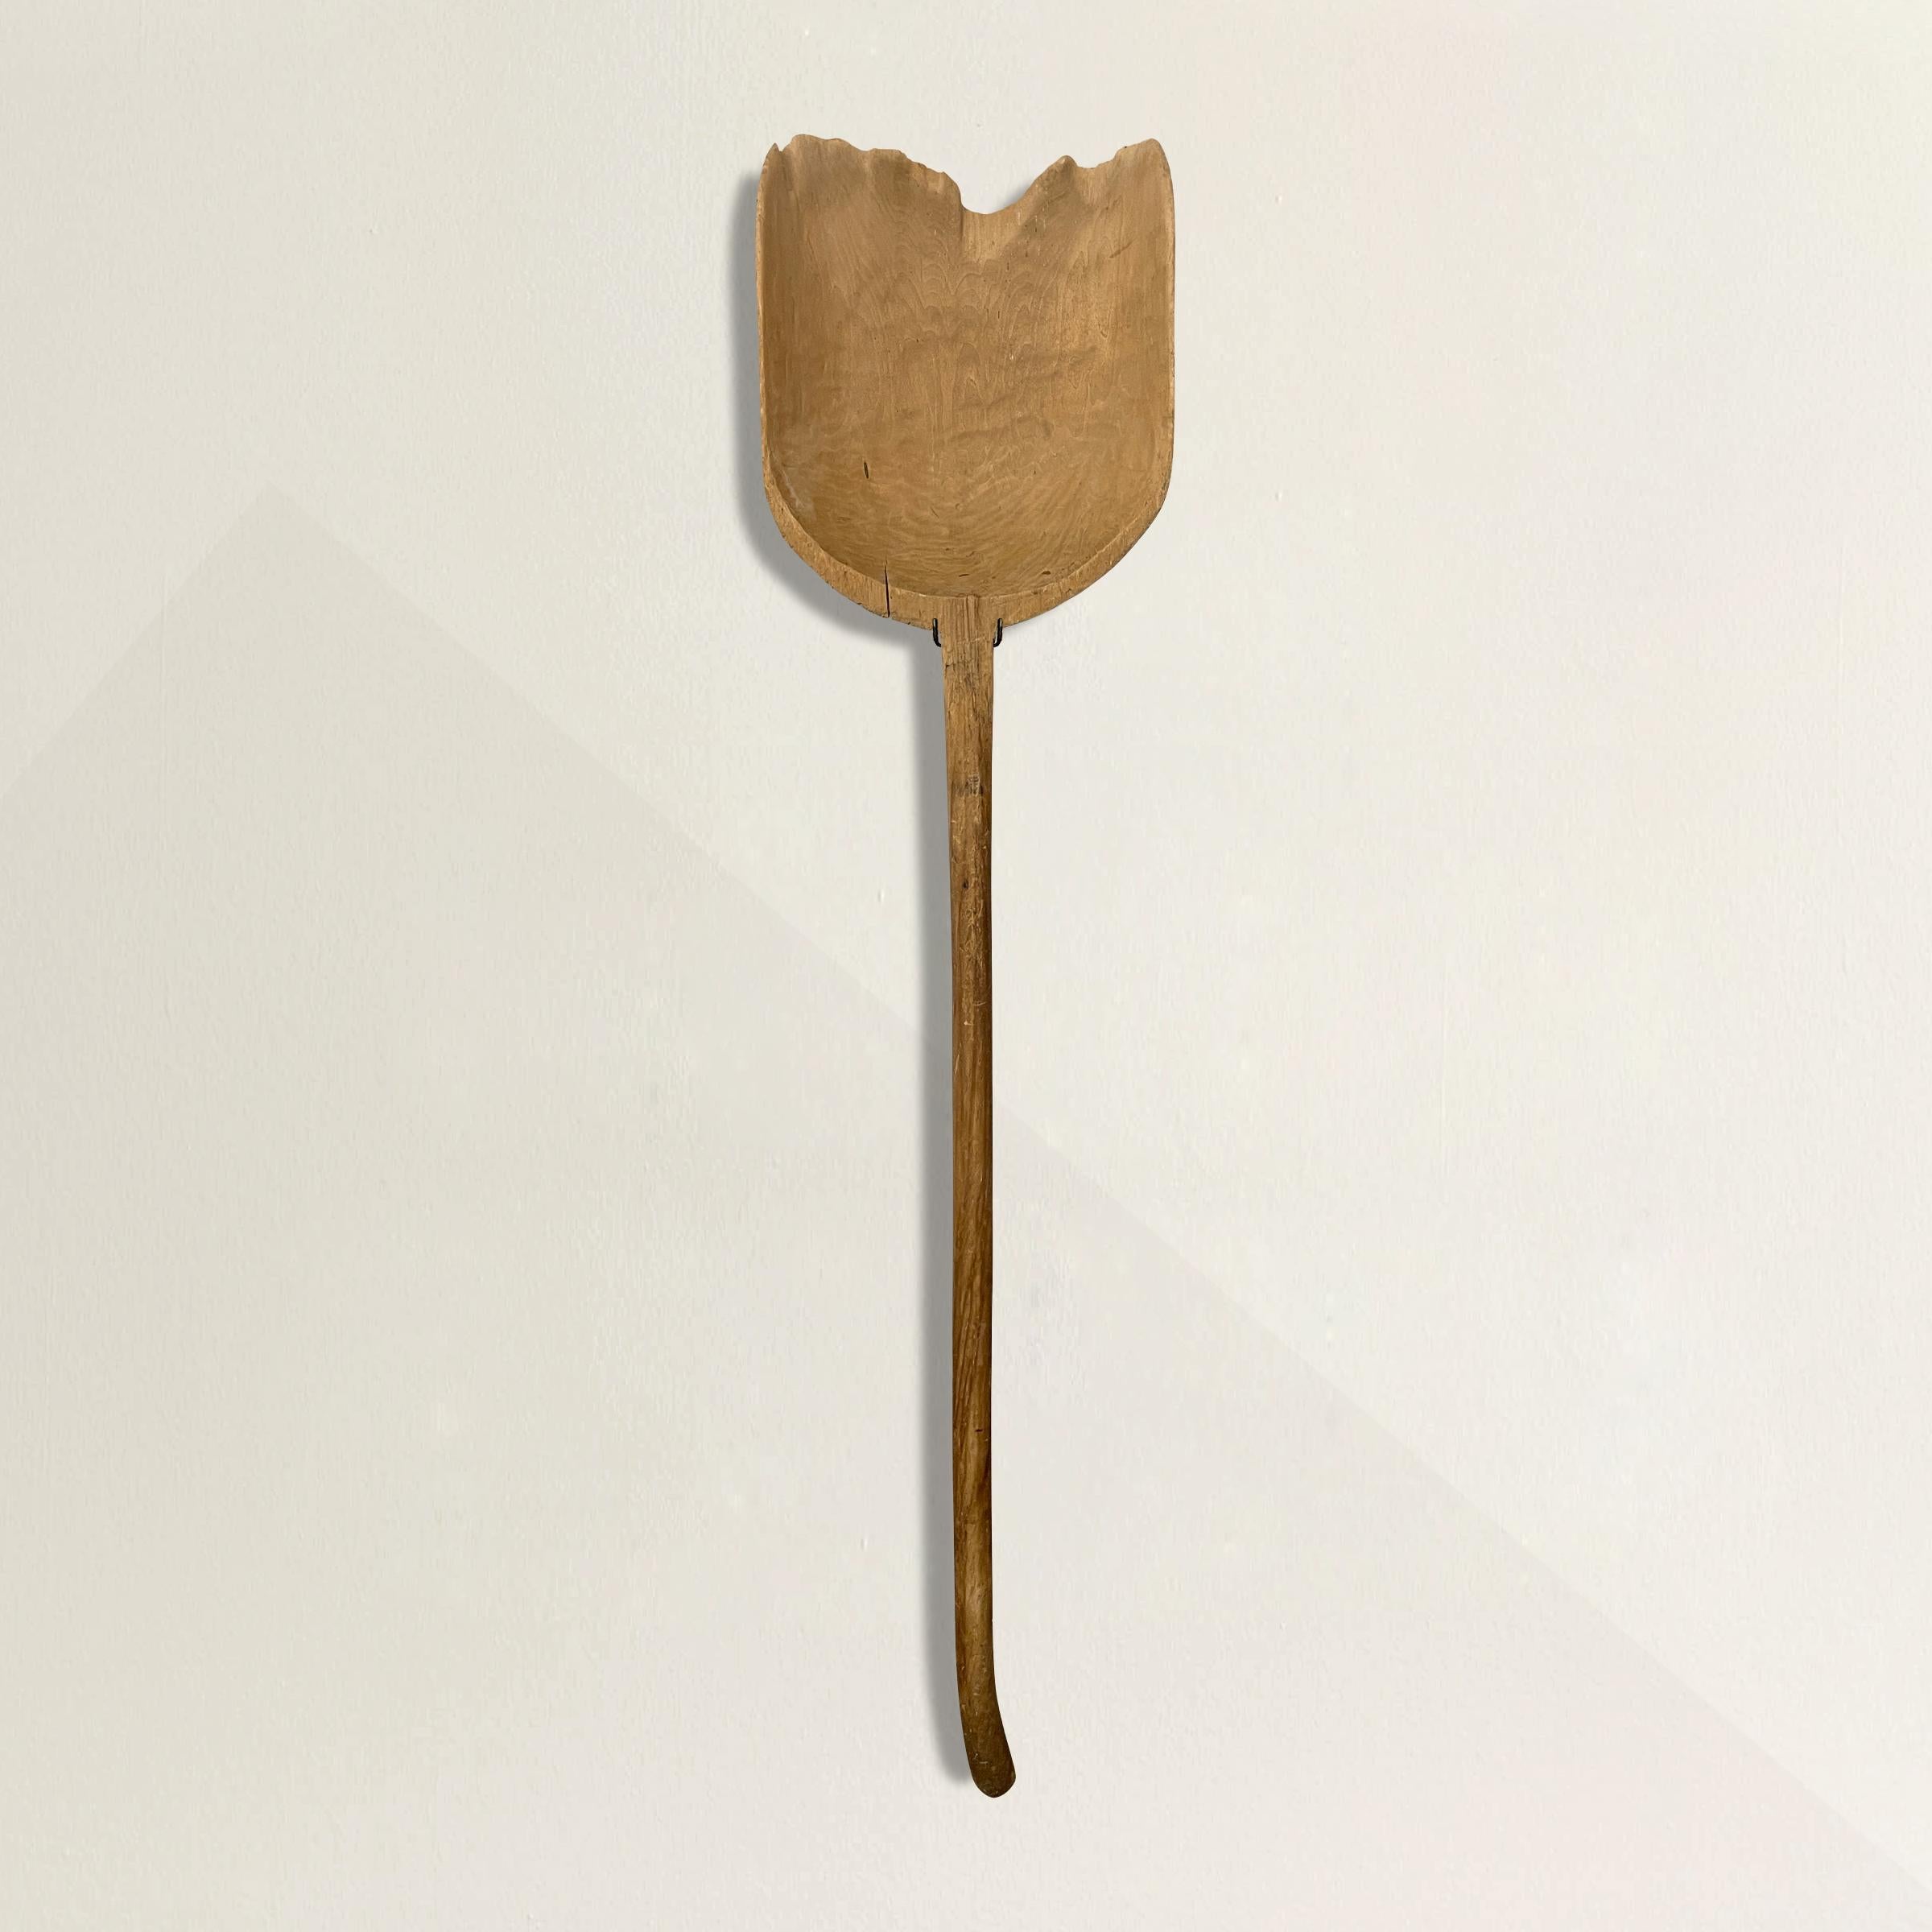 A simple yet honest 19th century hand-carved wood grain shovel with the most wonderful smooth finish only one hundred years of use could bestow, and mounted on a custom steel wall mount so it can be displayed anywhere you wish. Found in Northern